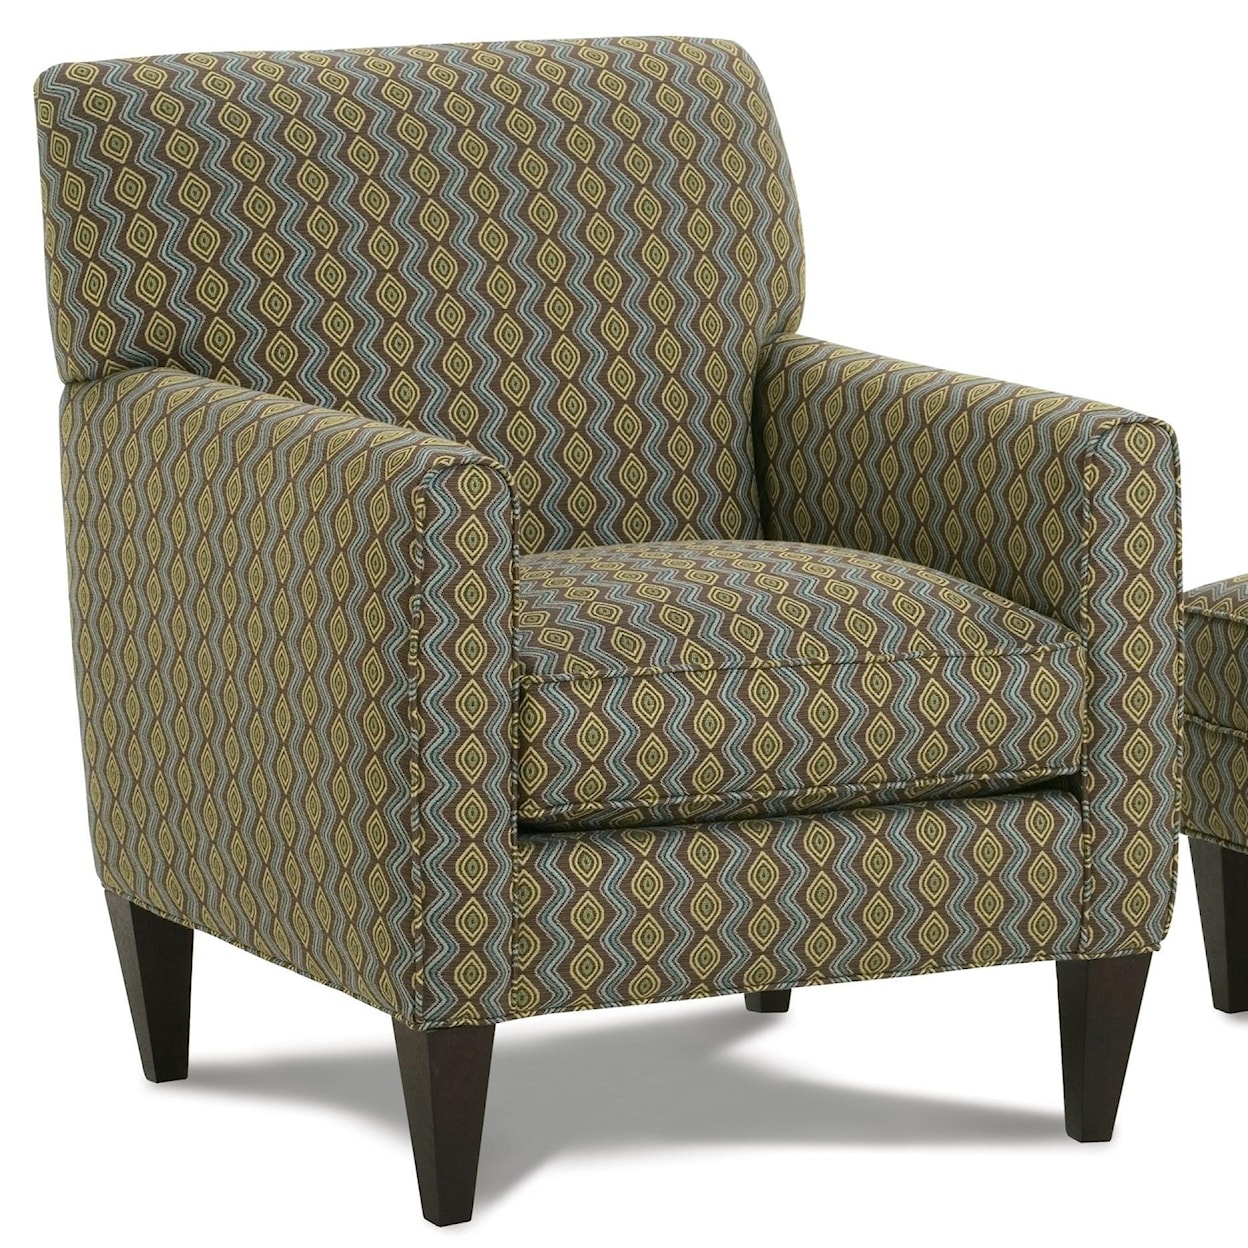 Rowe Chairs and Accents Willet Chair